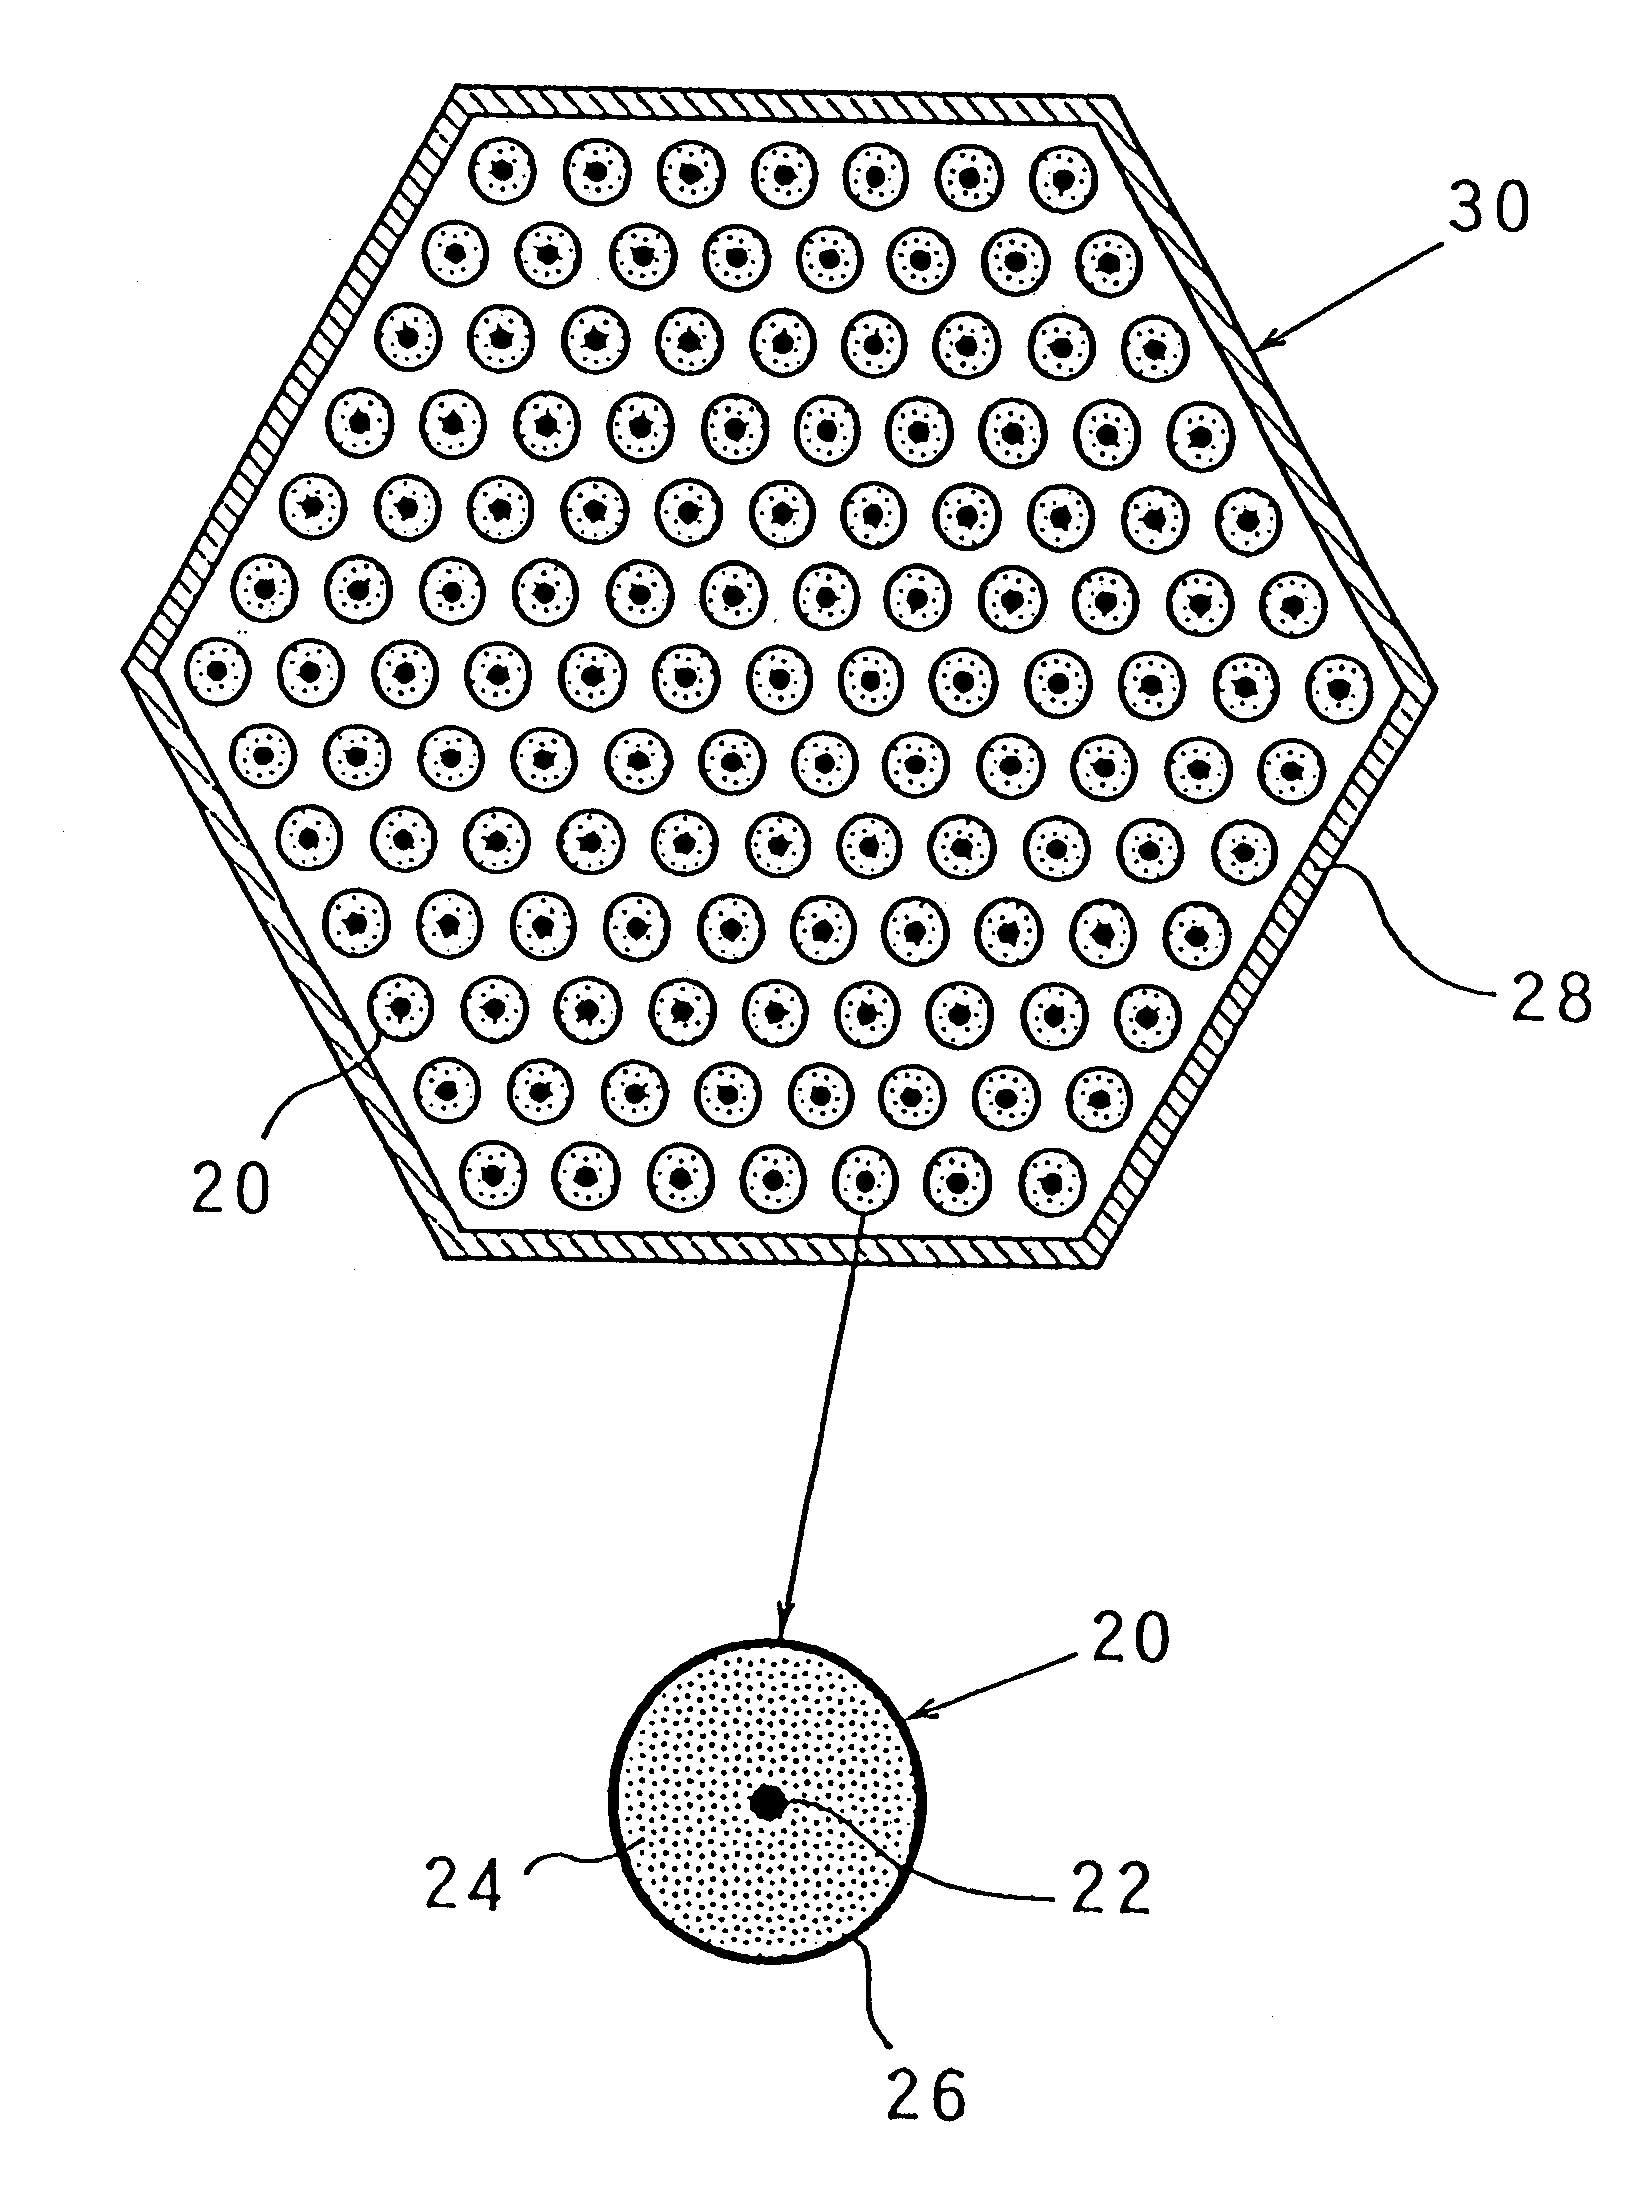 Assembly for transmutation of a long-lived radioactive material